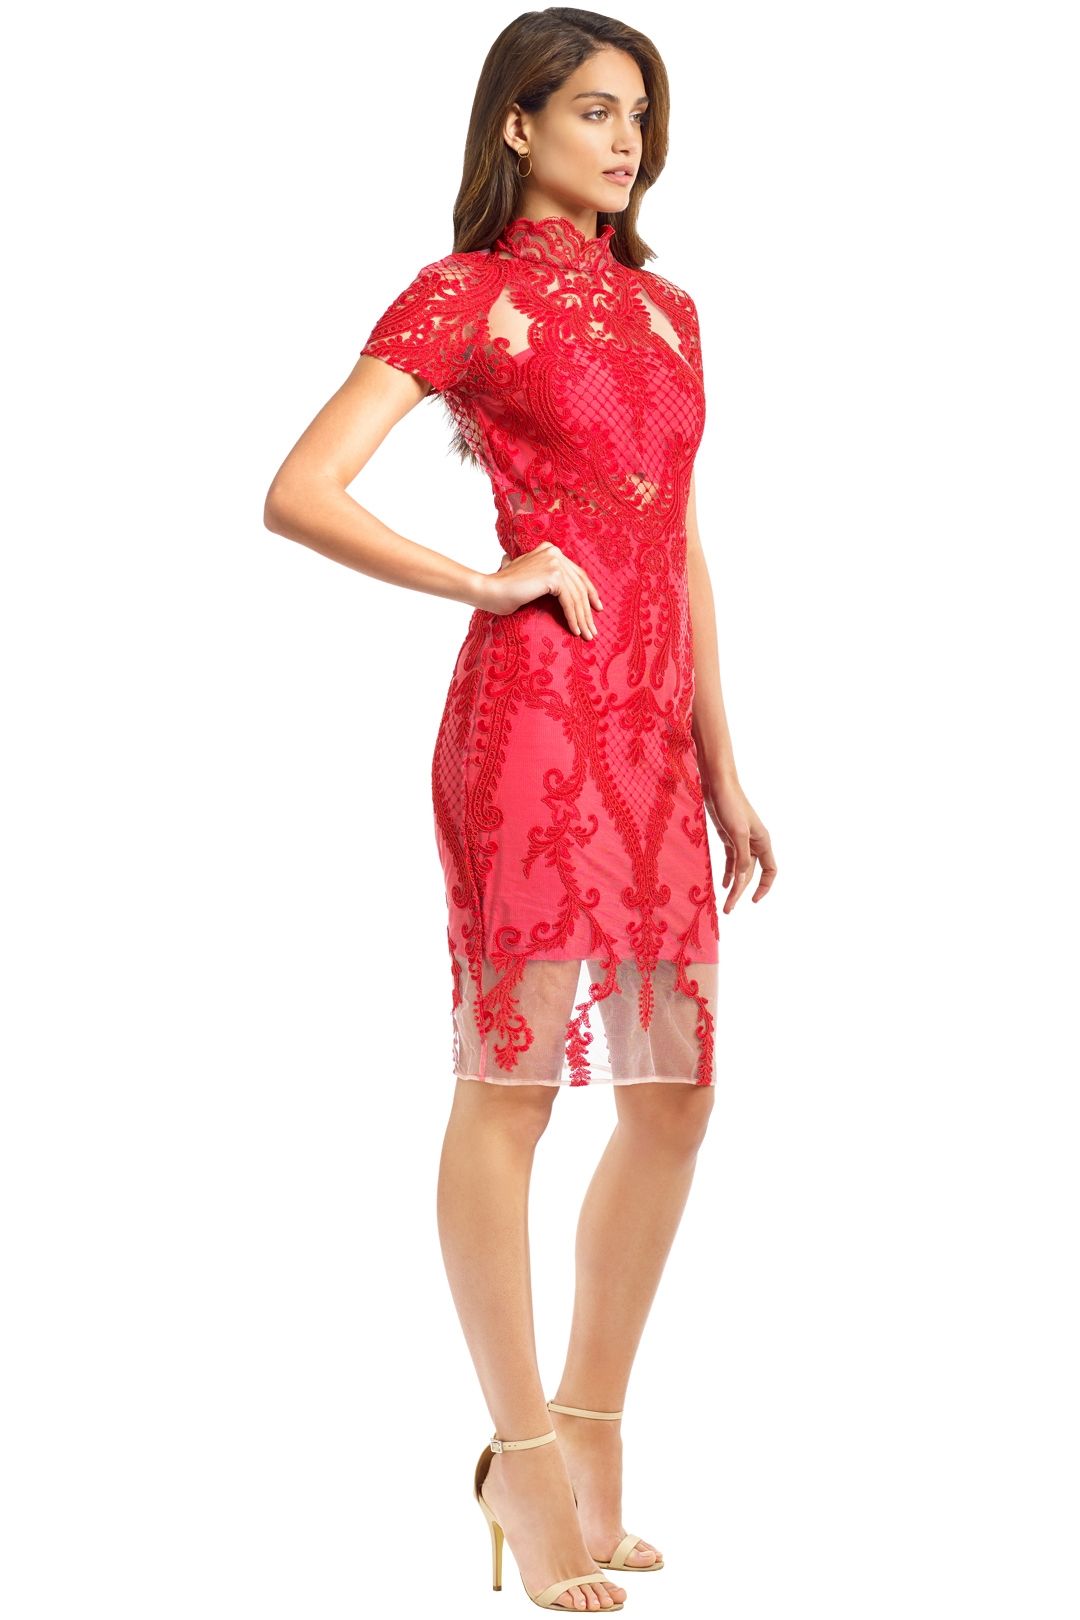 Thurley - Indianna Dress - Red - Side